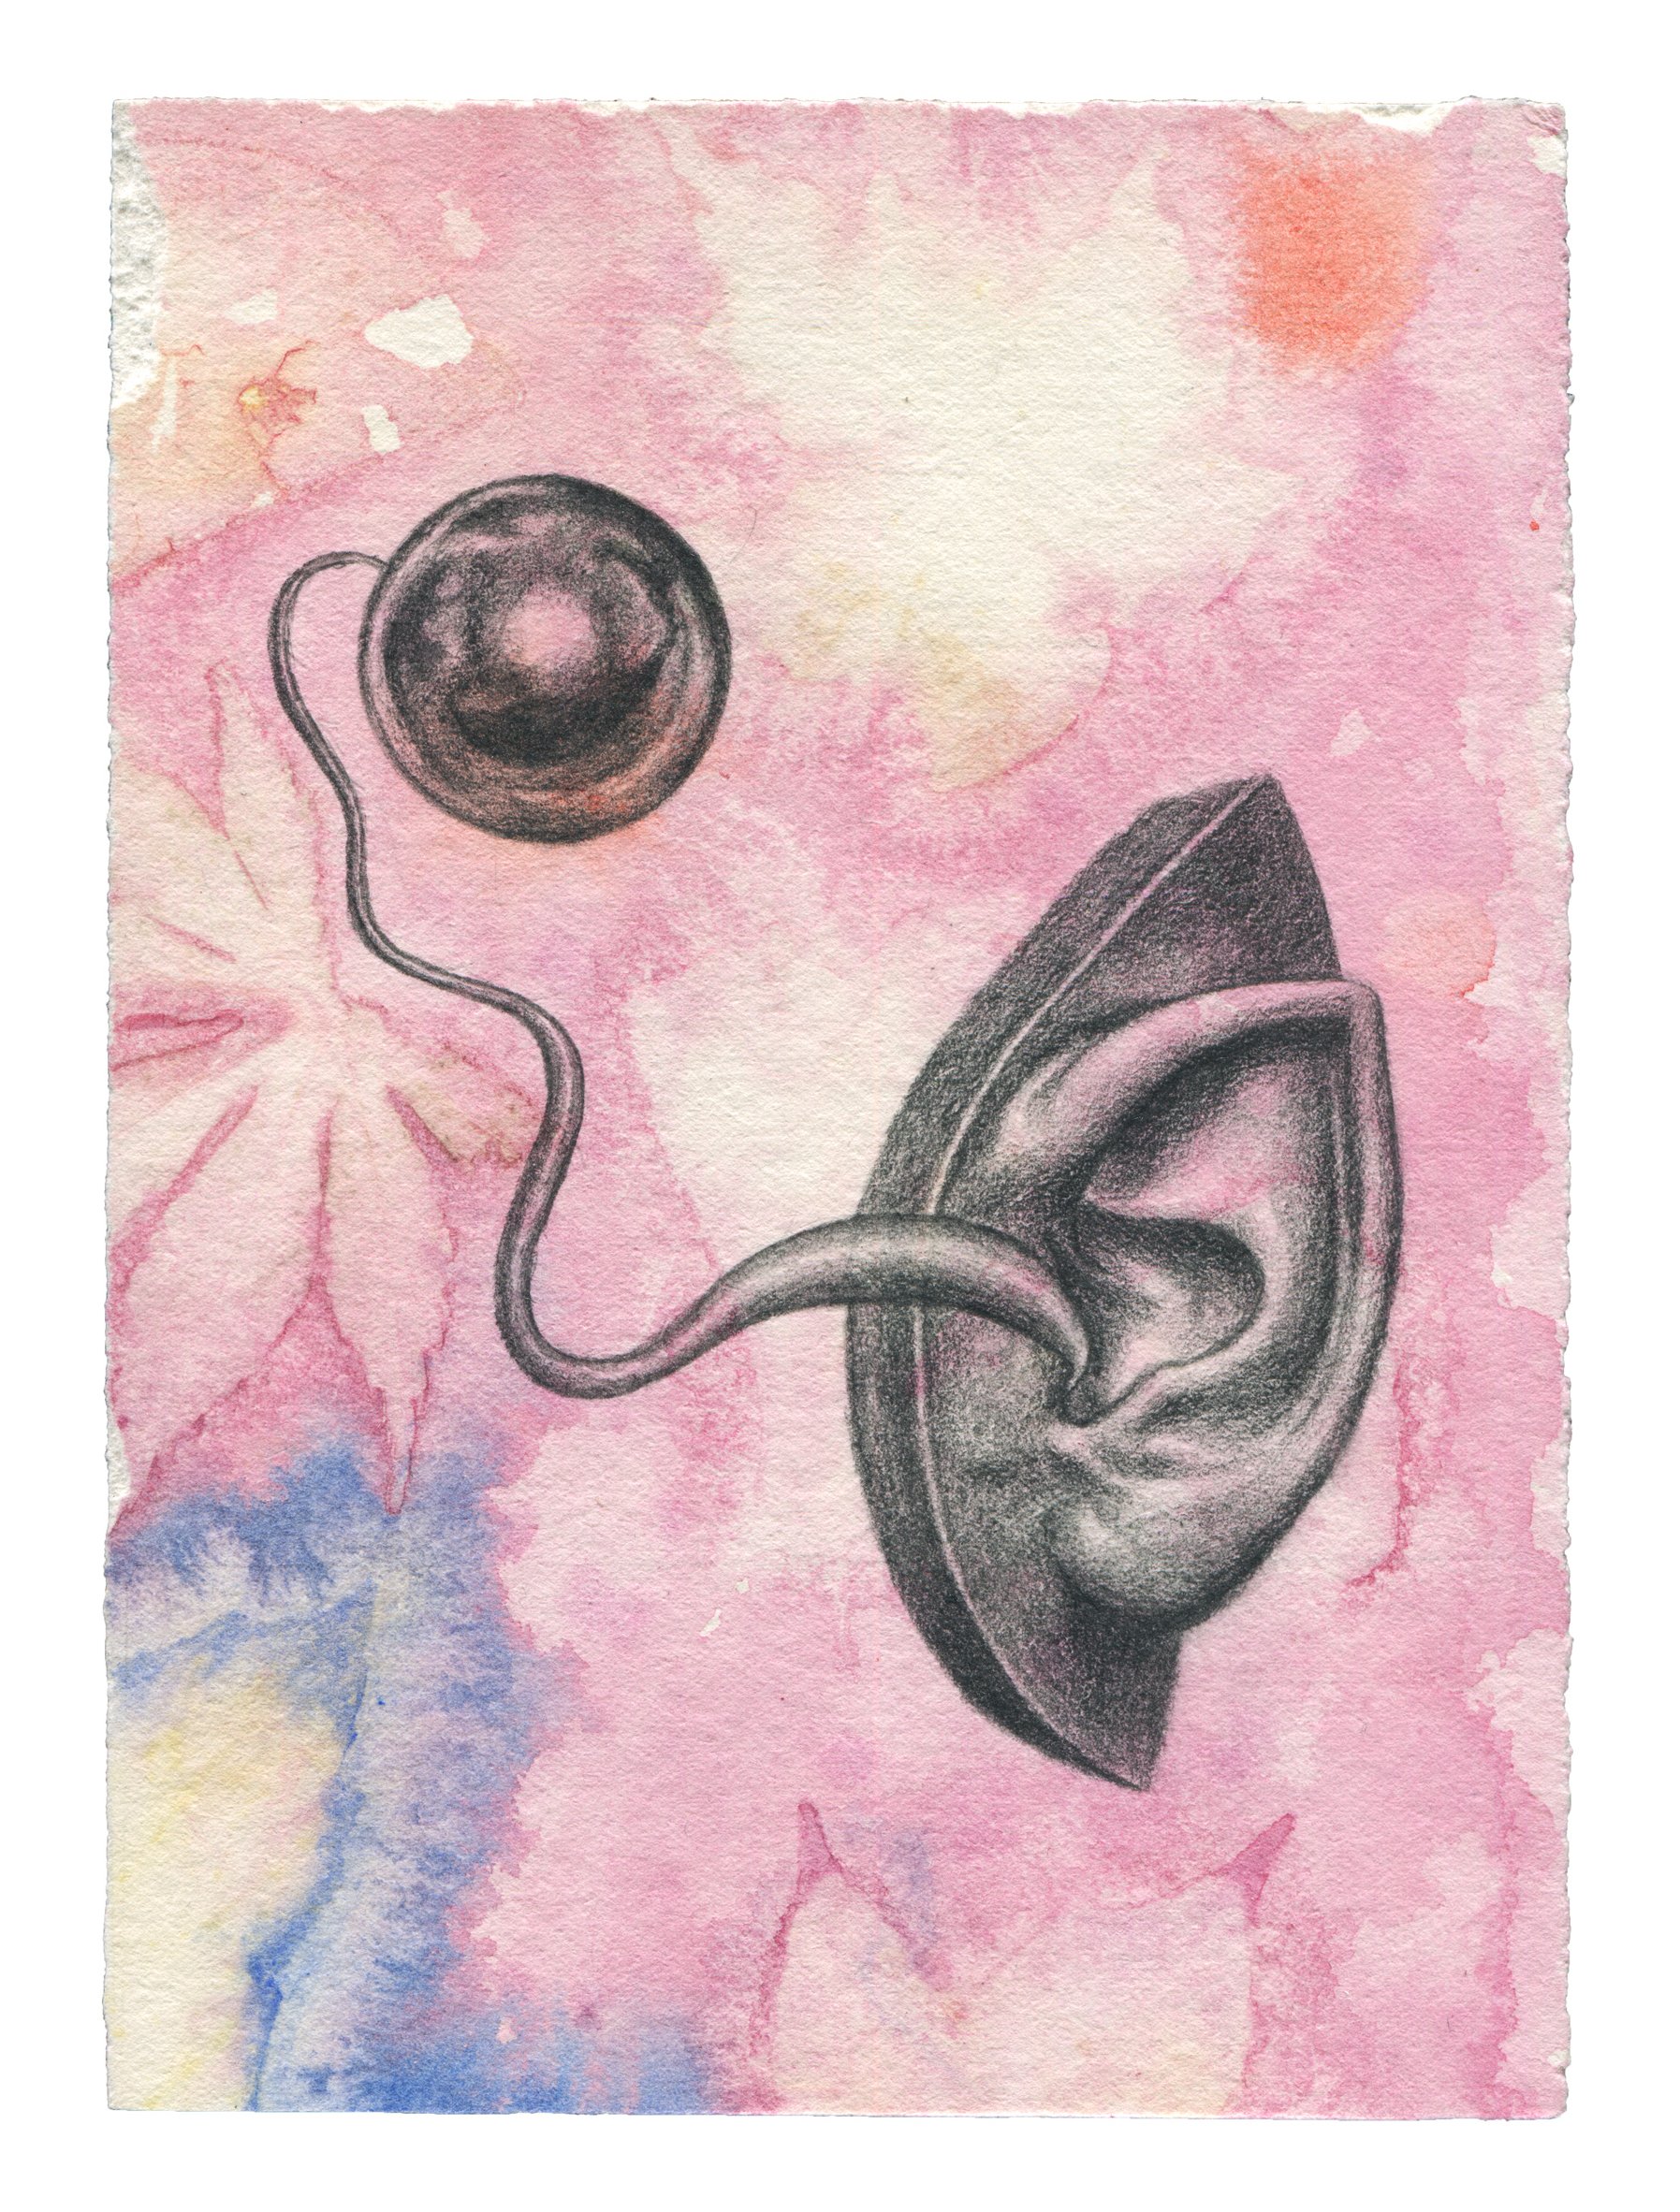  Lisa Saeboe,  Celestial Communications , 2023, Watercolor, Natural Plant Pigment, and Graphite on Paper, 5 x 7 inches 